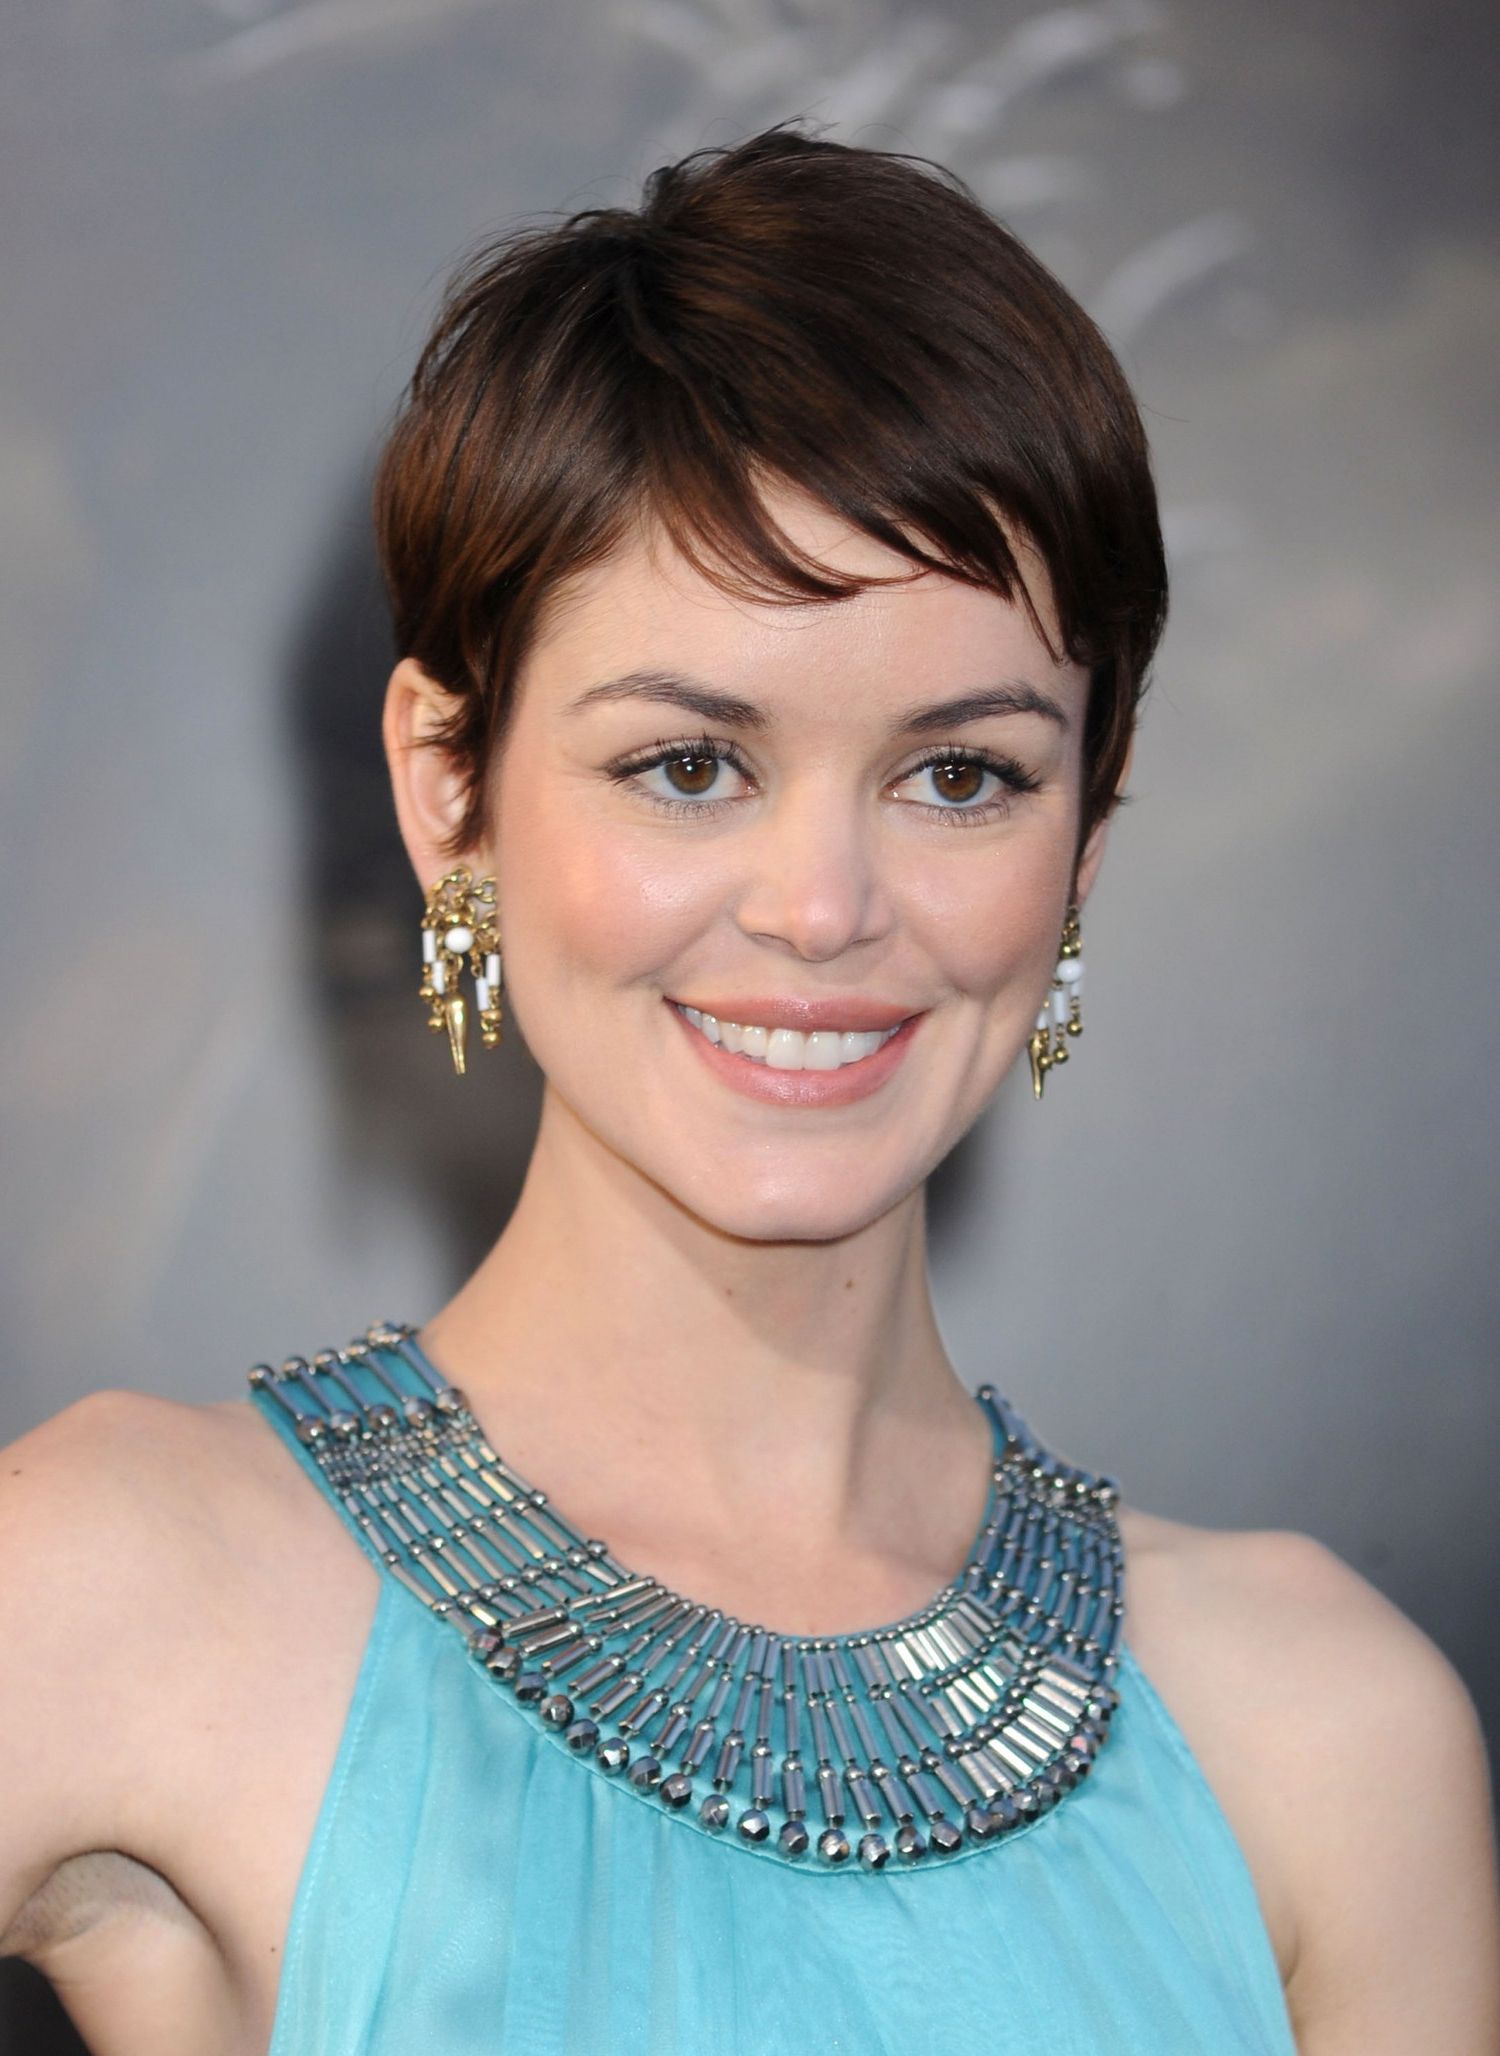 19 Cute Celebrity Haircuts To Consider – Glamour For Cute Short Haircuts For Teen Girls (View 9 of 25)